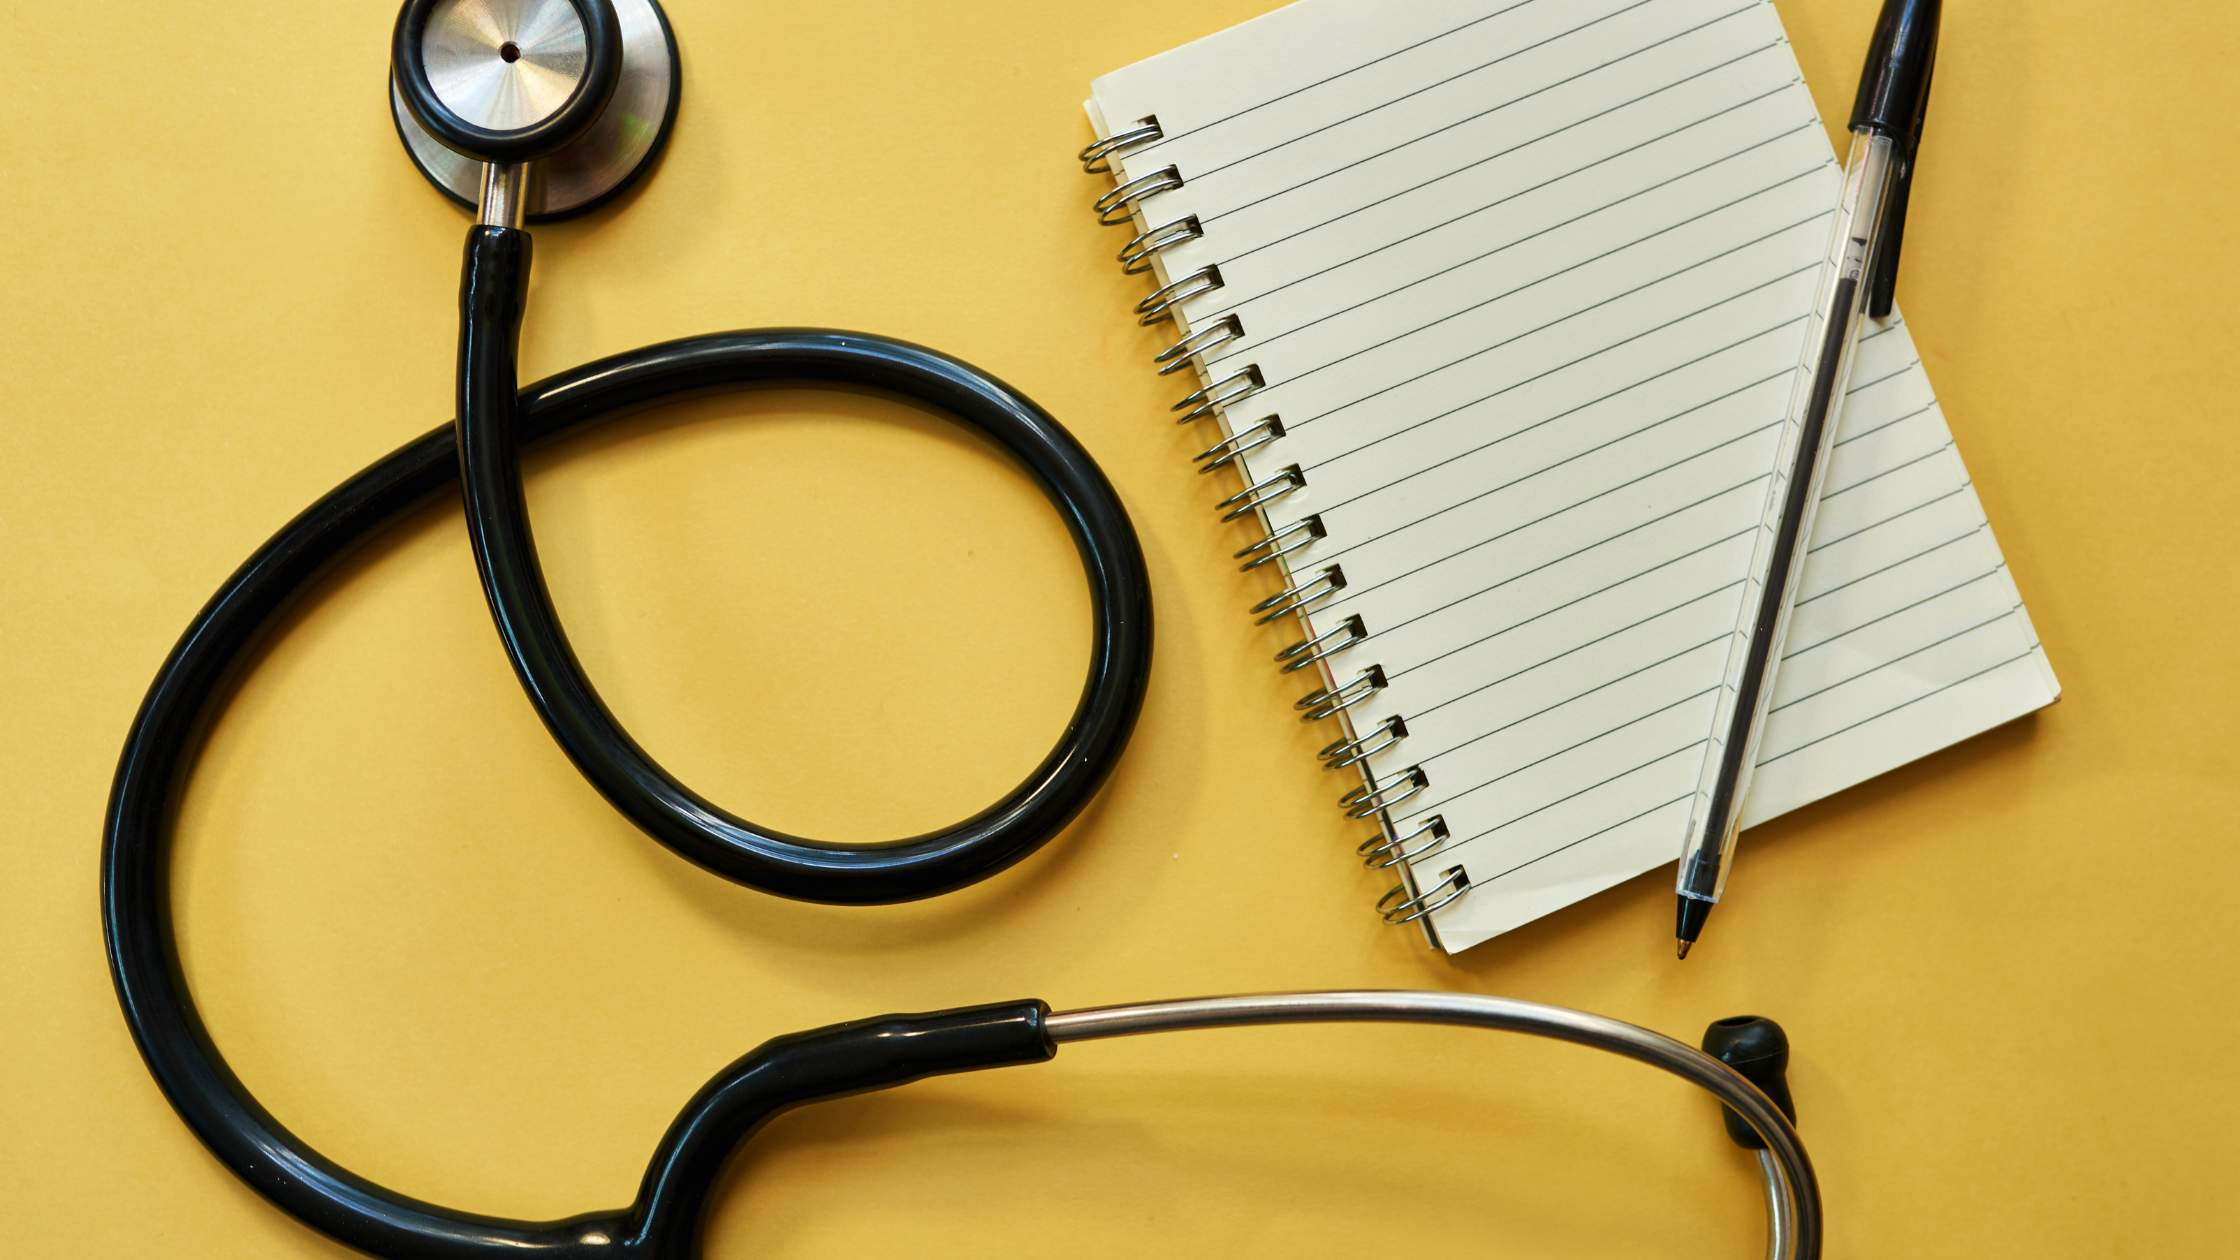 An image of a stethoscope and a blank writing pad.